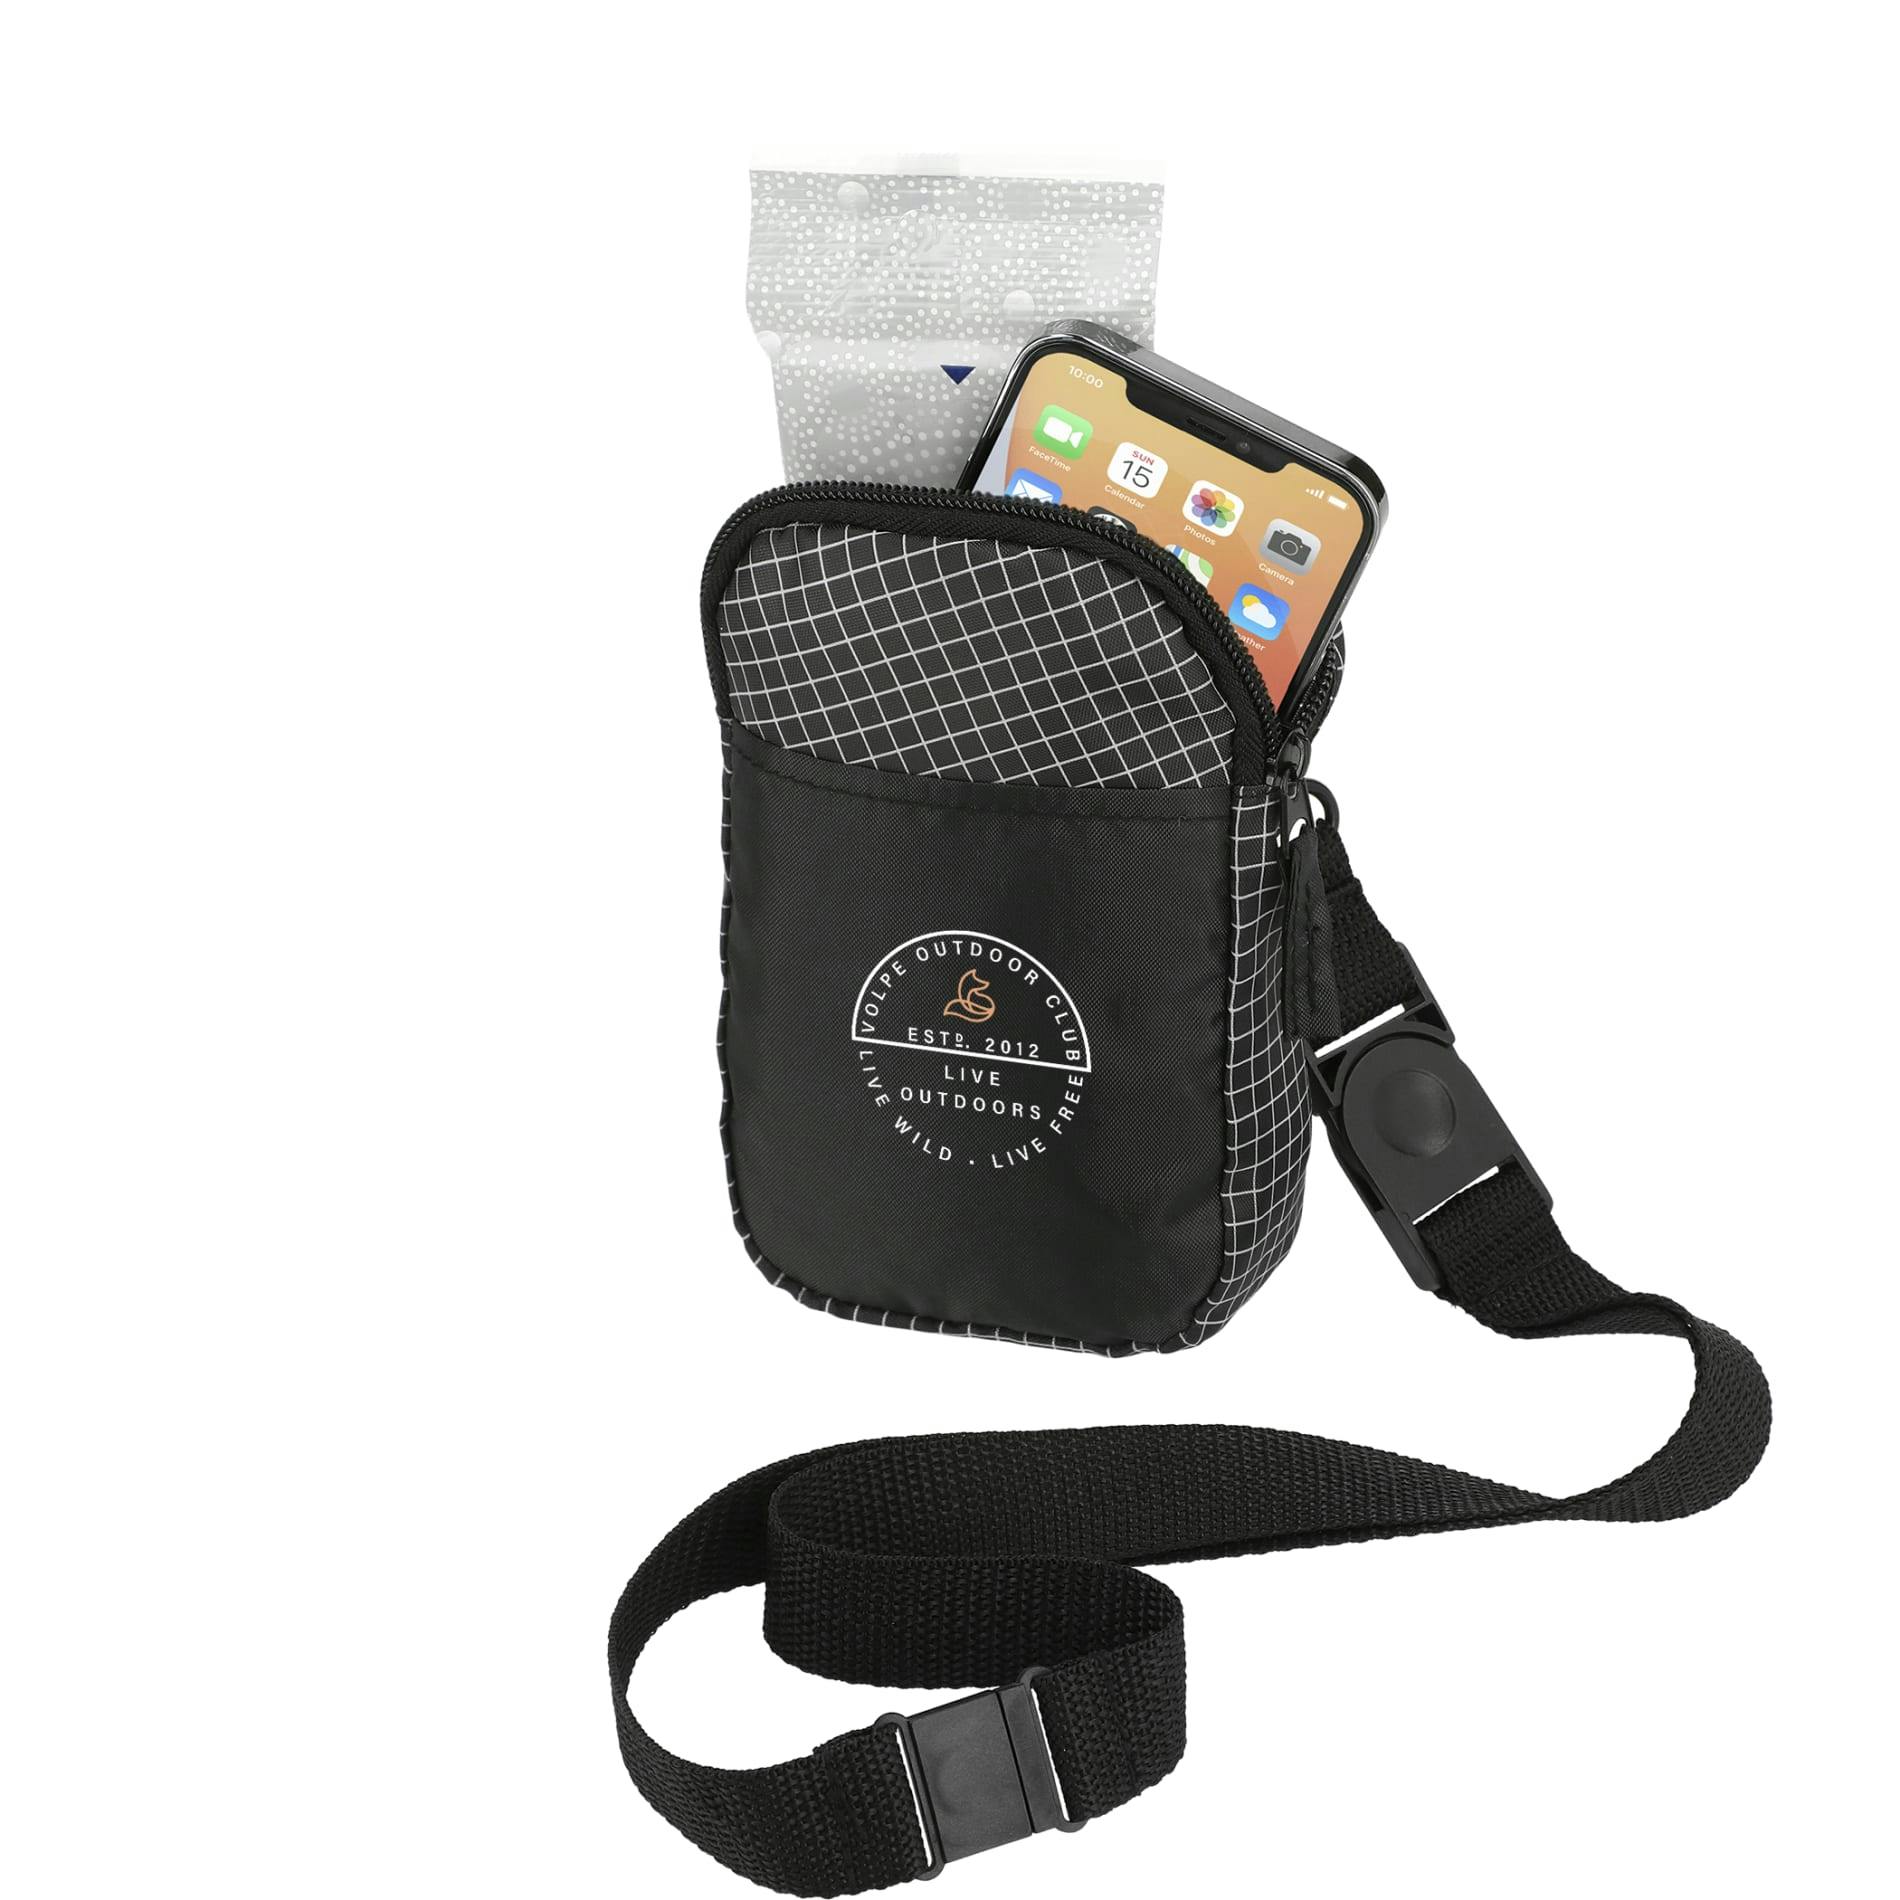 Grid Lanyard Phone Pouch - additional Image 2